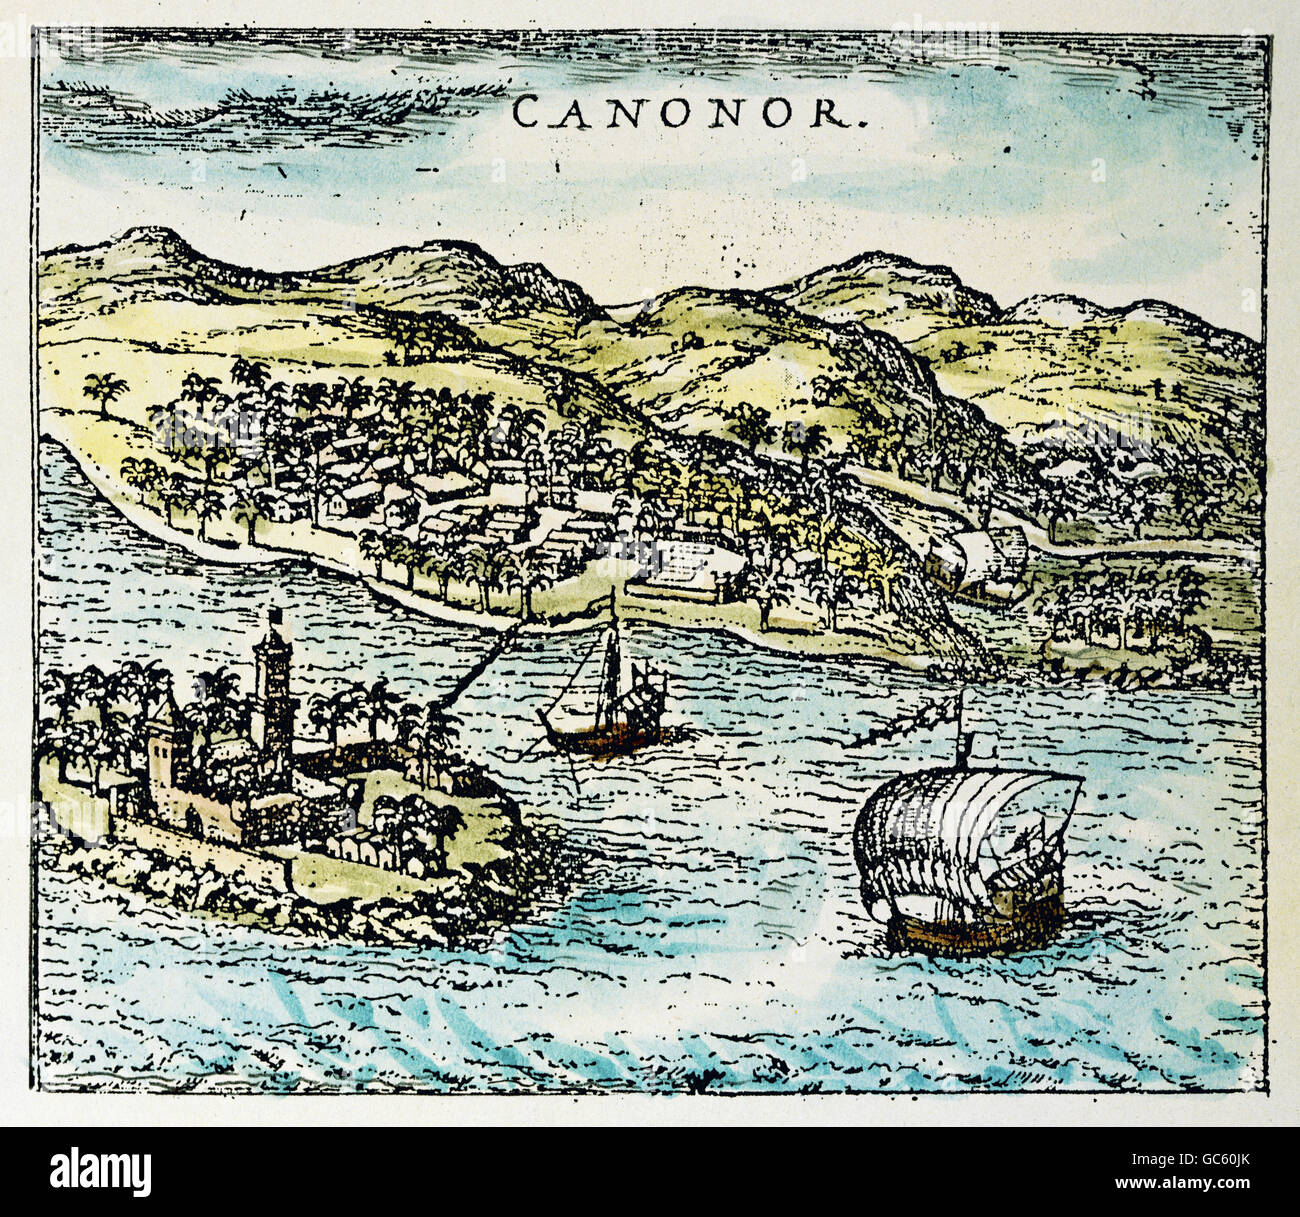 geography / travel, India, Kannur, city views / cityscapes, colour engraving, France, second half 16th century, private collection, historic, historical, Asia, view, cityscape, Cannanore, Cananor, ancient Portugese branch office, founded 1502 by navigator and explorer Vasco da Gama (1469 - 1524), people, Additional-Rights-Clearences-Not Available Stock Photo